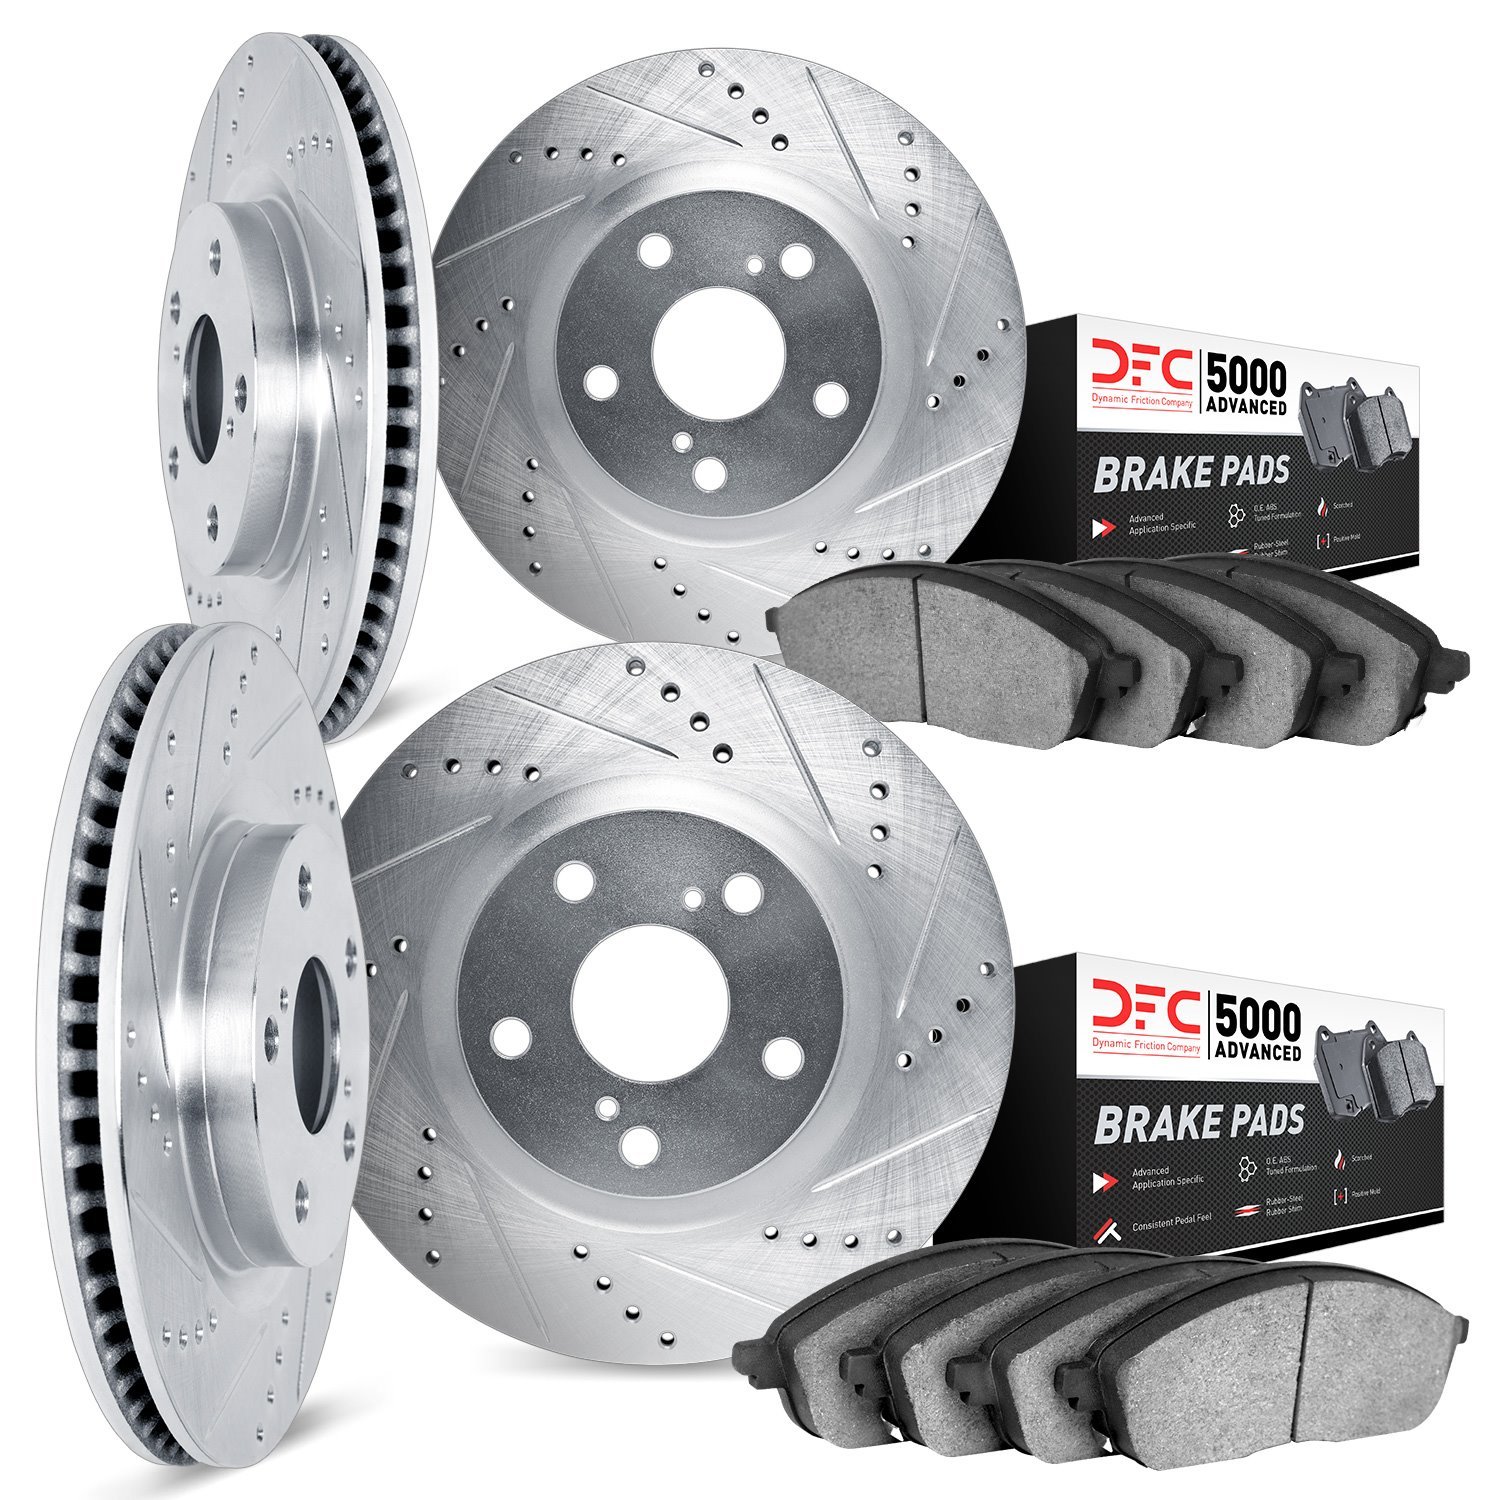 7504-02007 Drilled/Slotted Brake Rotors w/5000 Advanced Brake Pads Kit [Silver], 1984-1989 Porsche, Position: Front and Rear